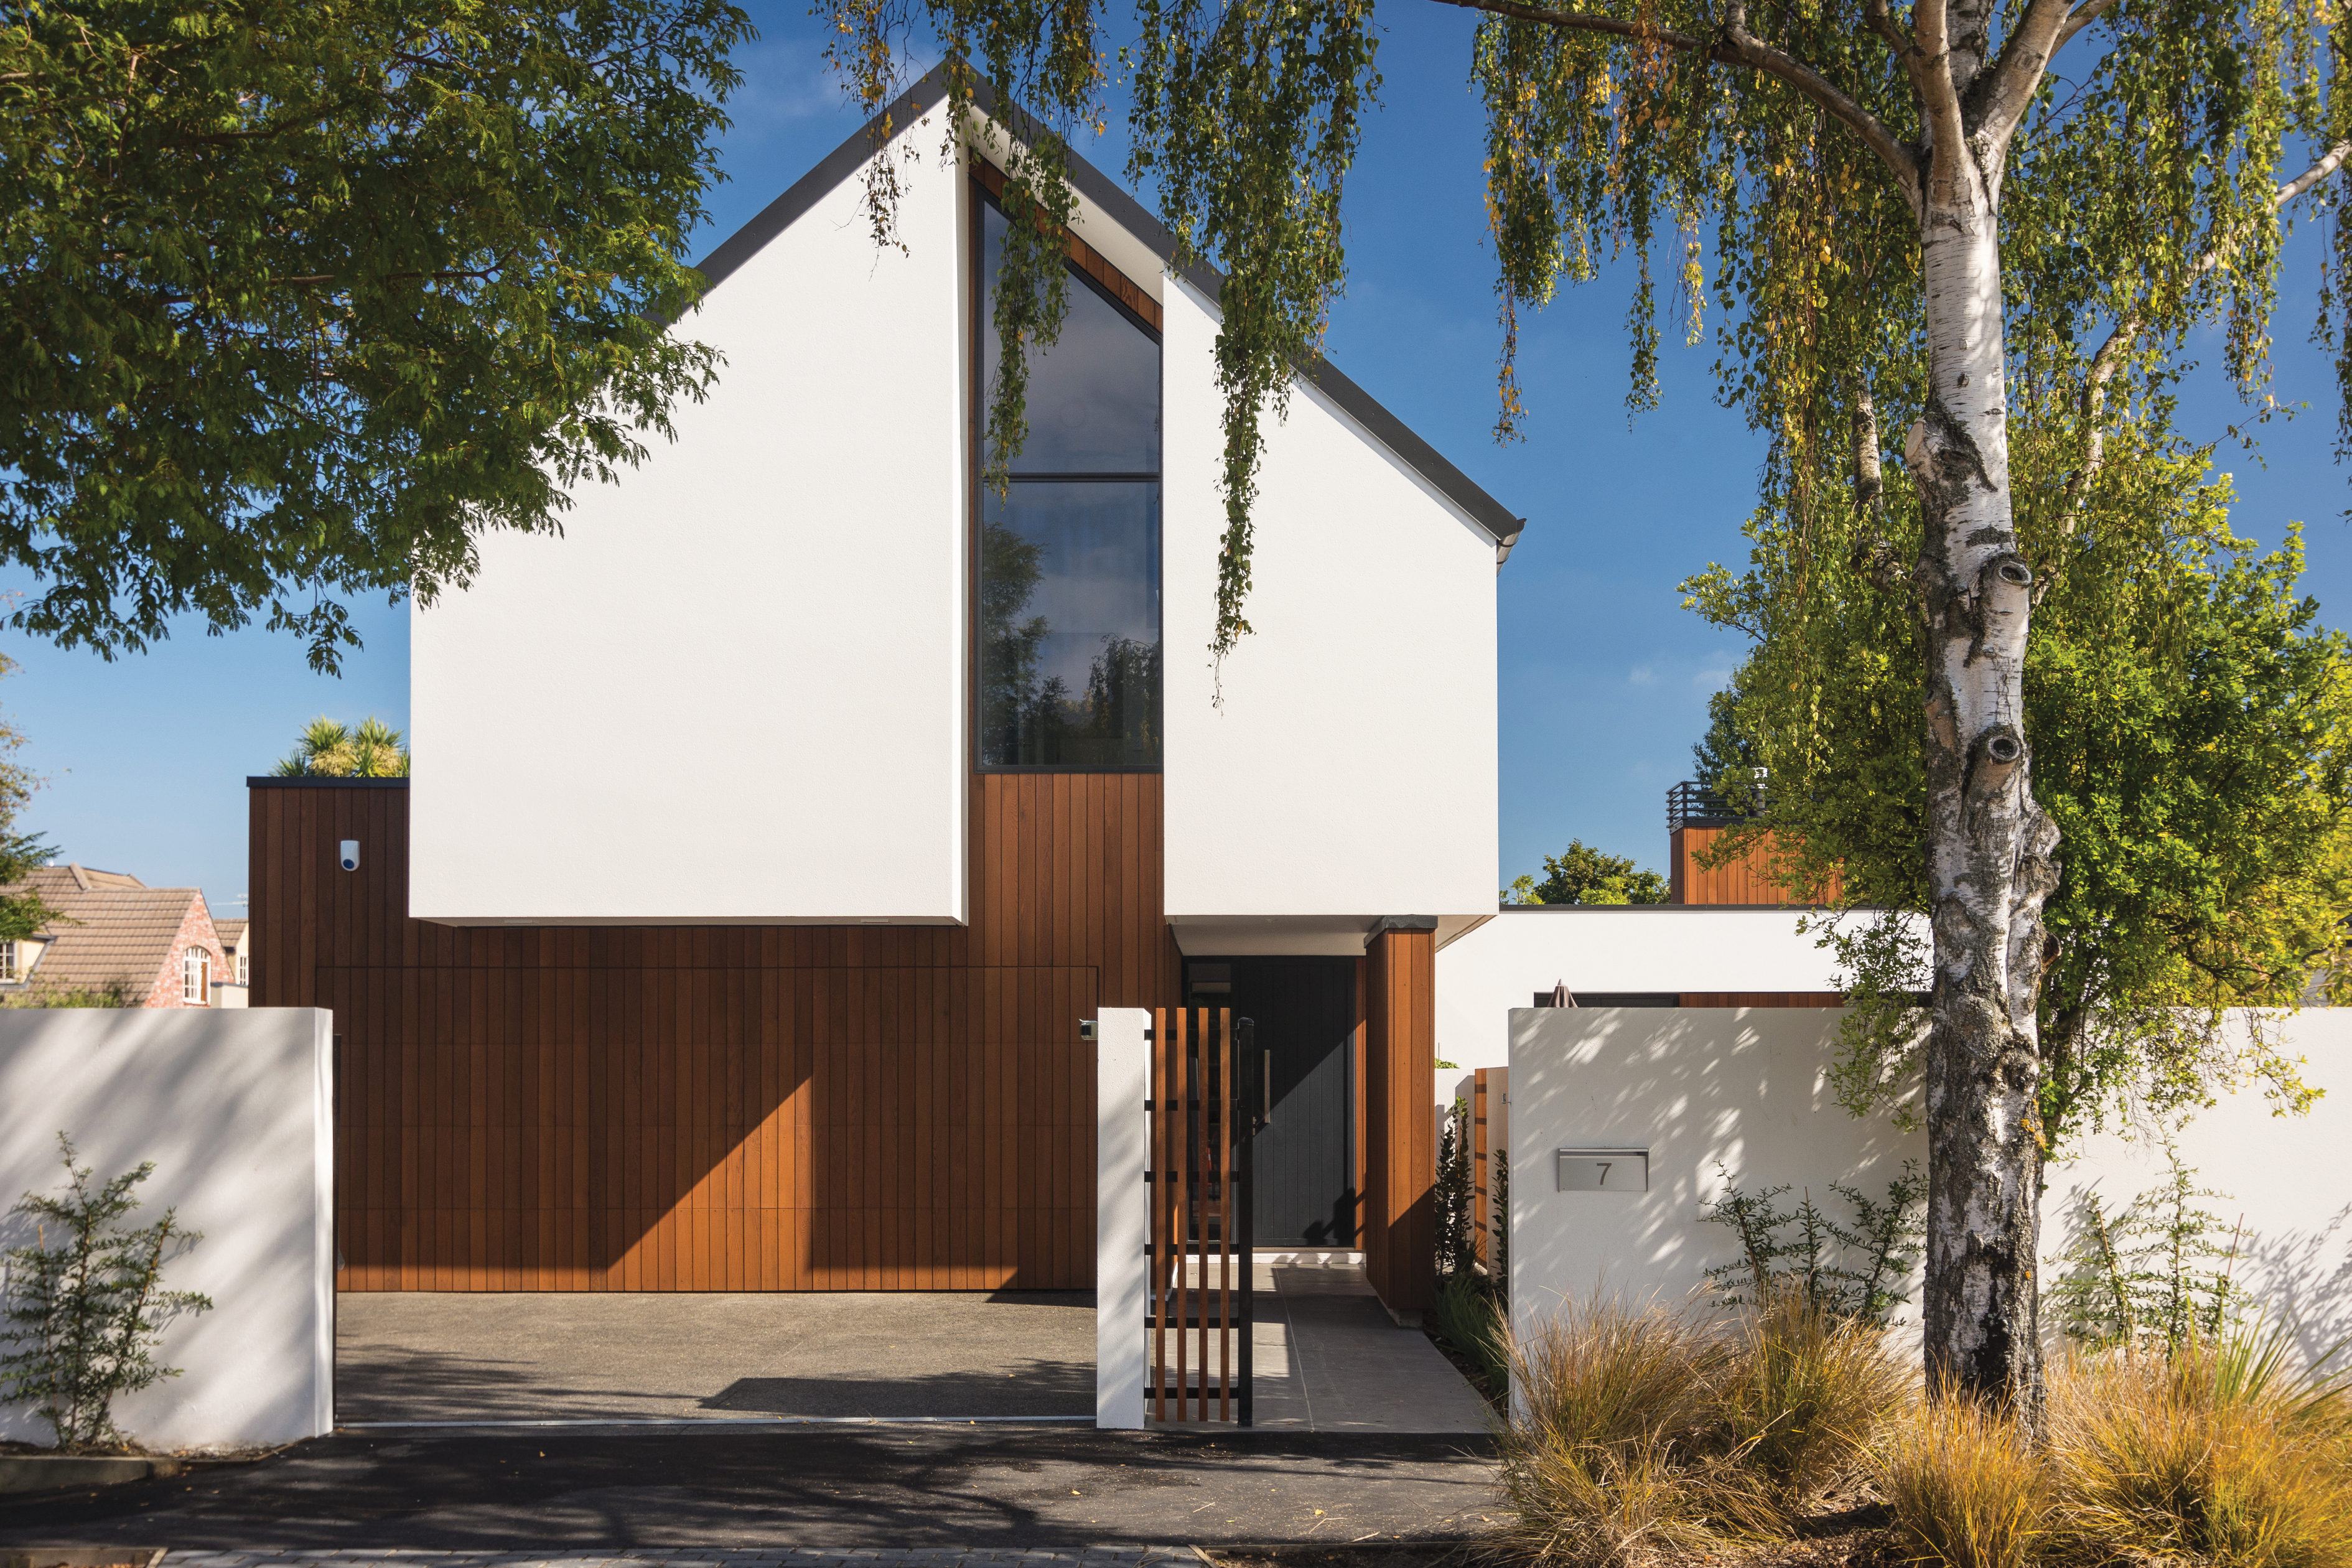 Modernist, geometric St. Albans home front-on in bright sunlight